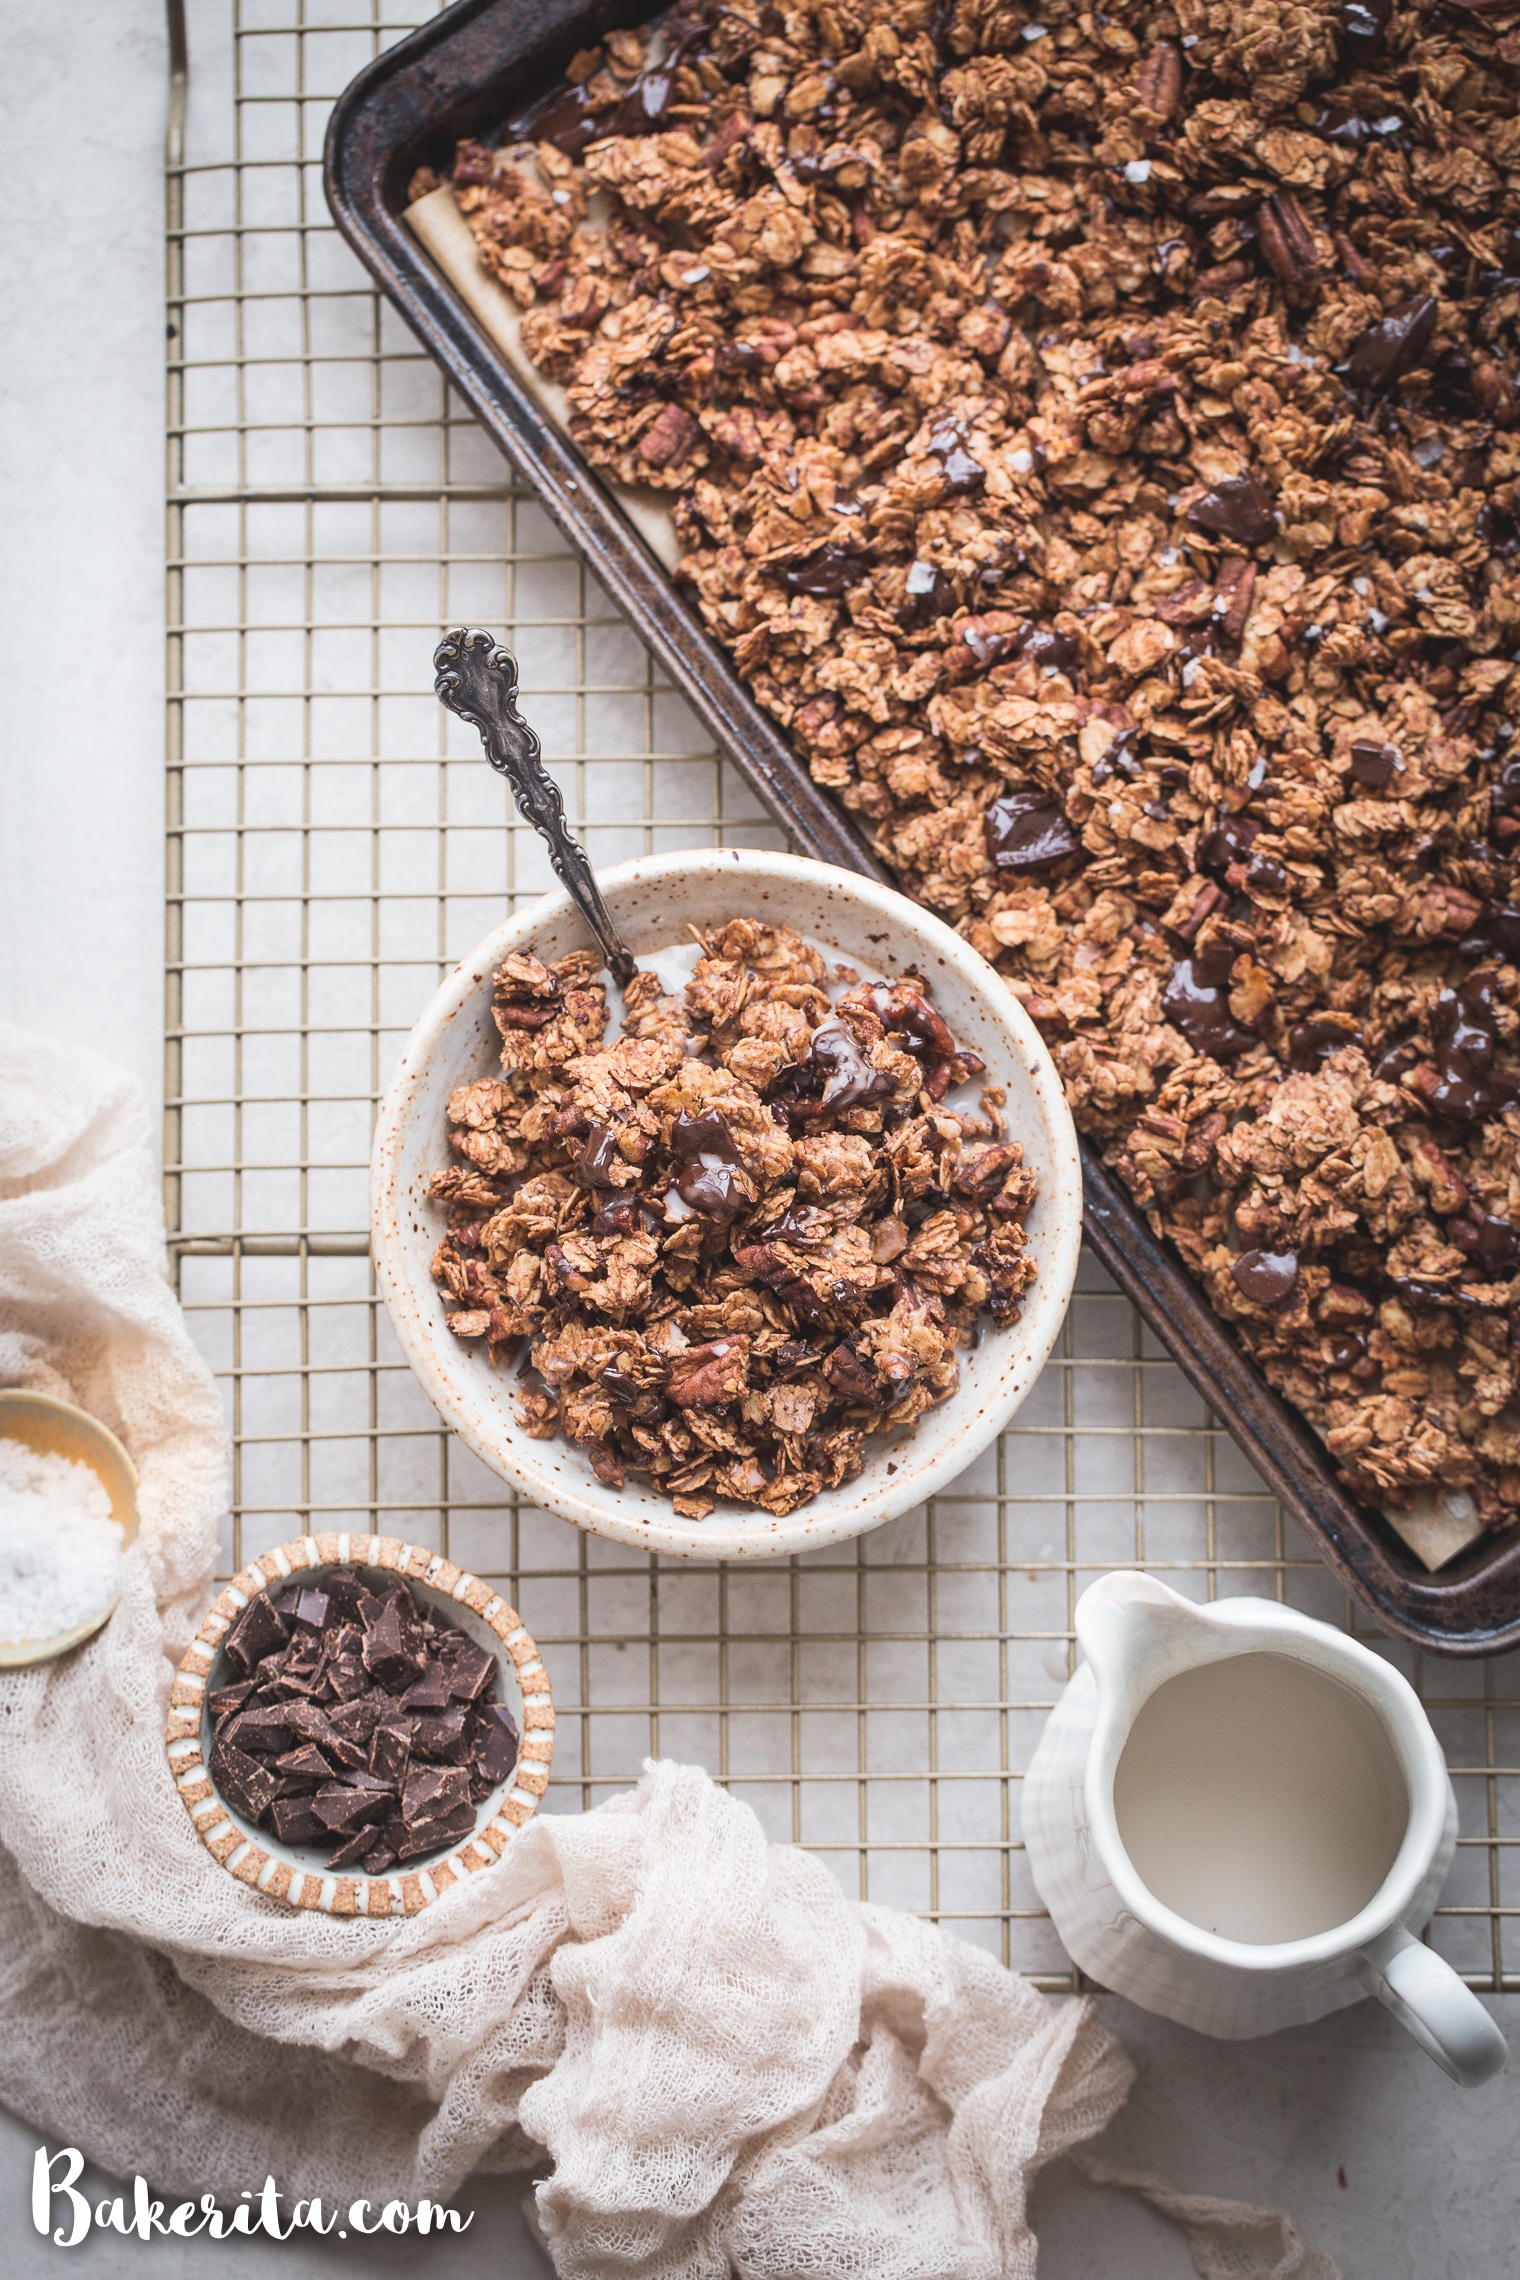 This Easy Chocolate Granola is a simple, gluten-free and vegan recipe that's made with just 8 ingredients! It's perfect served with dairy-free milk, sprinkled over yogurt, or eaten by the handful.